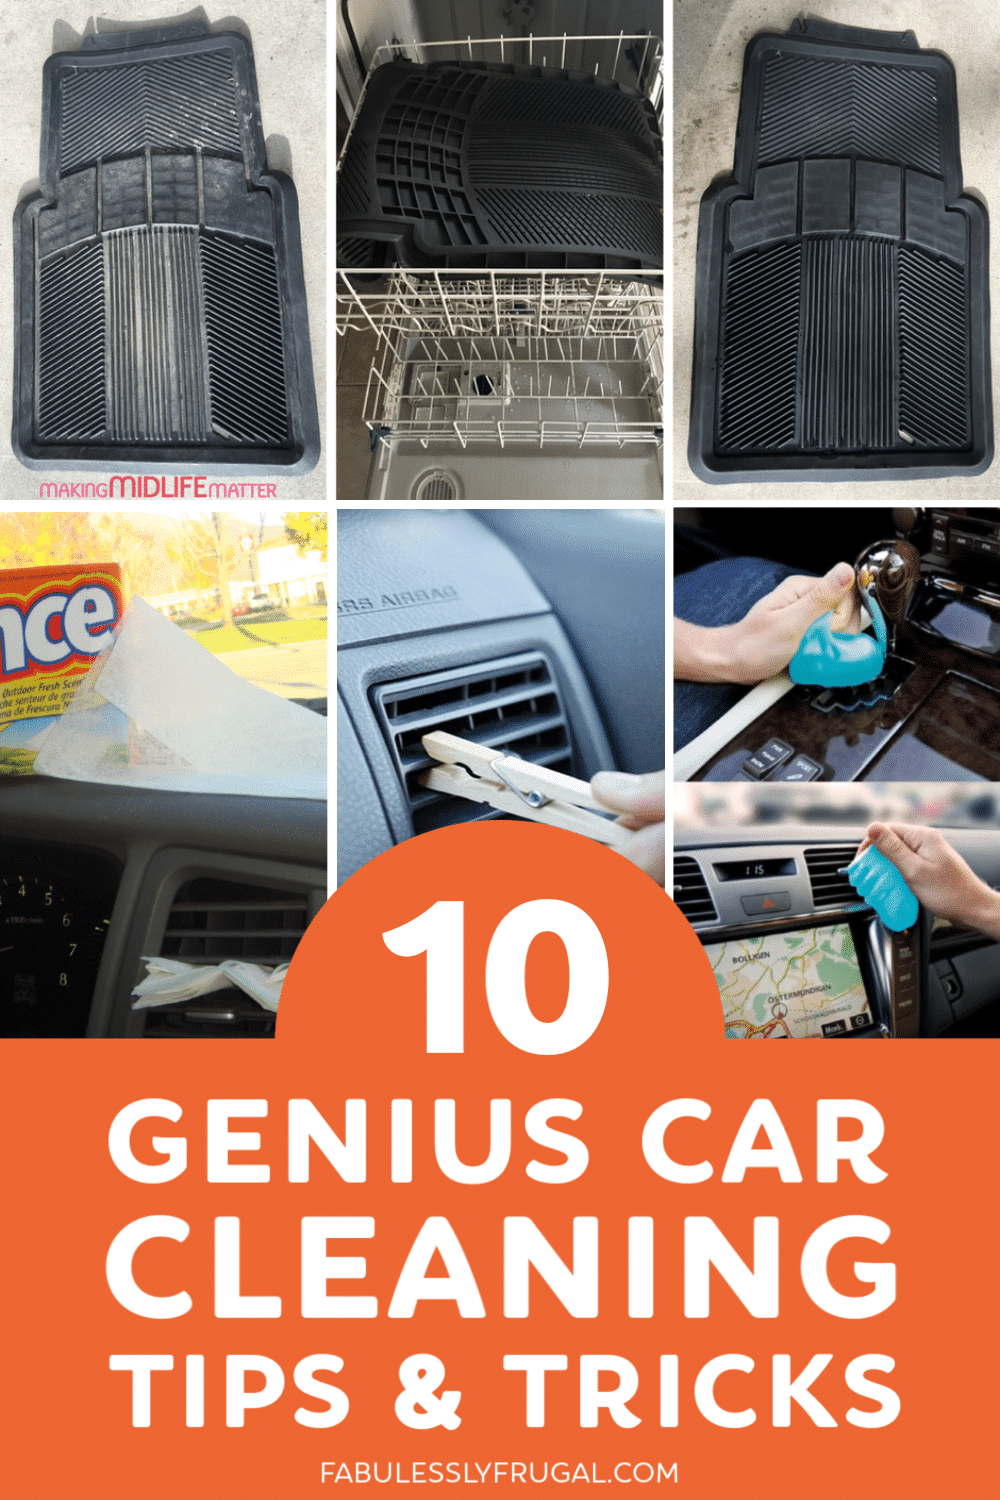 Car deep cleaning tips